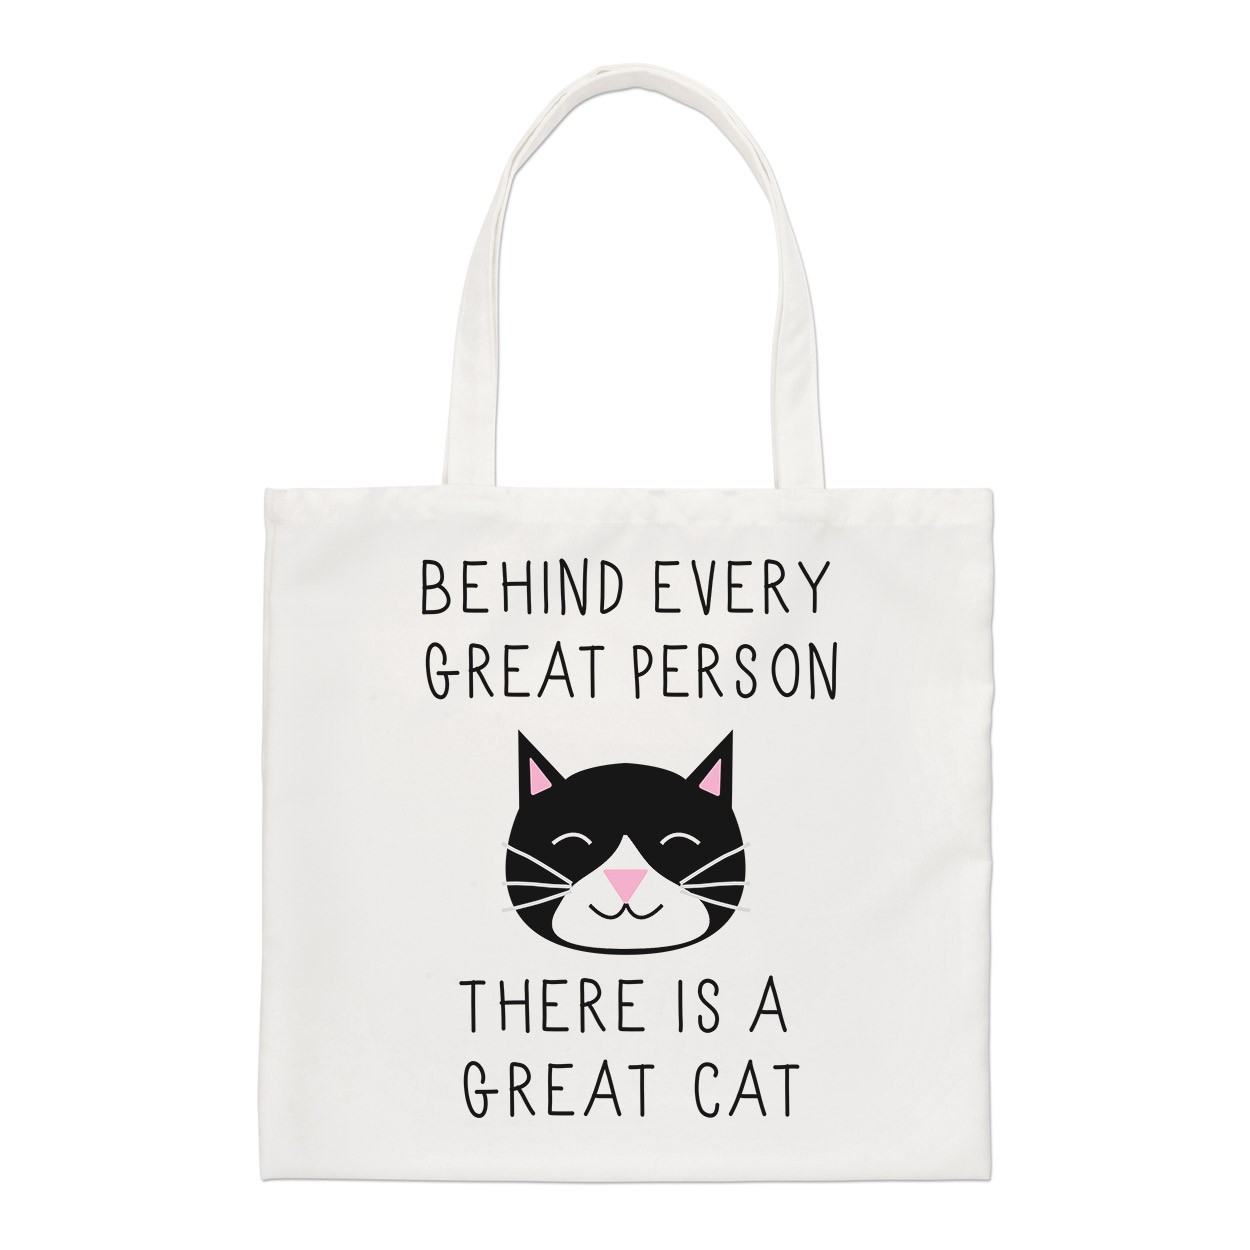 Behind Every Great Person Is A Great Cat Regular Tote Bag